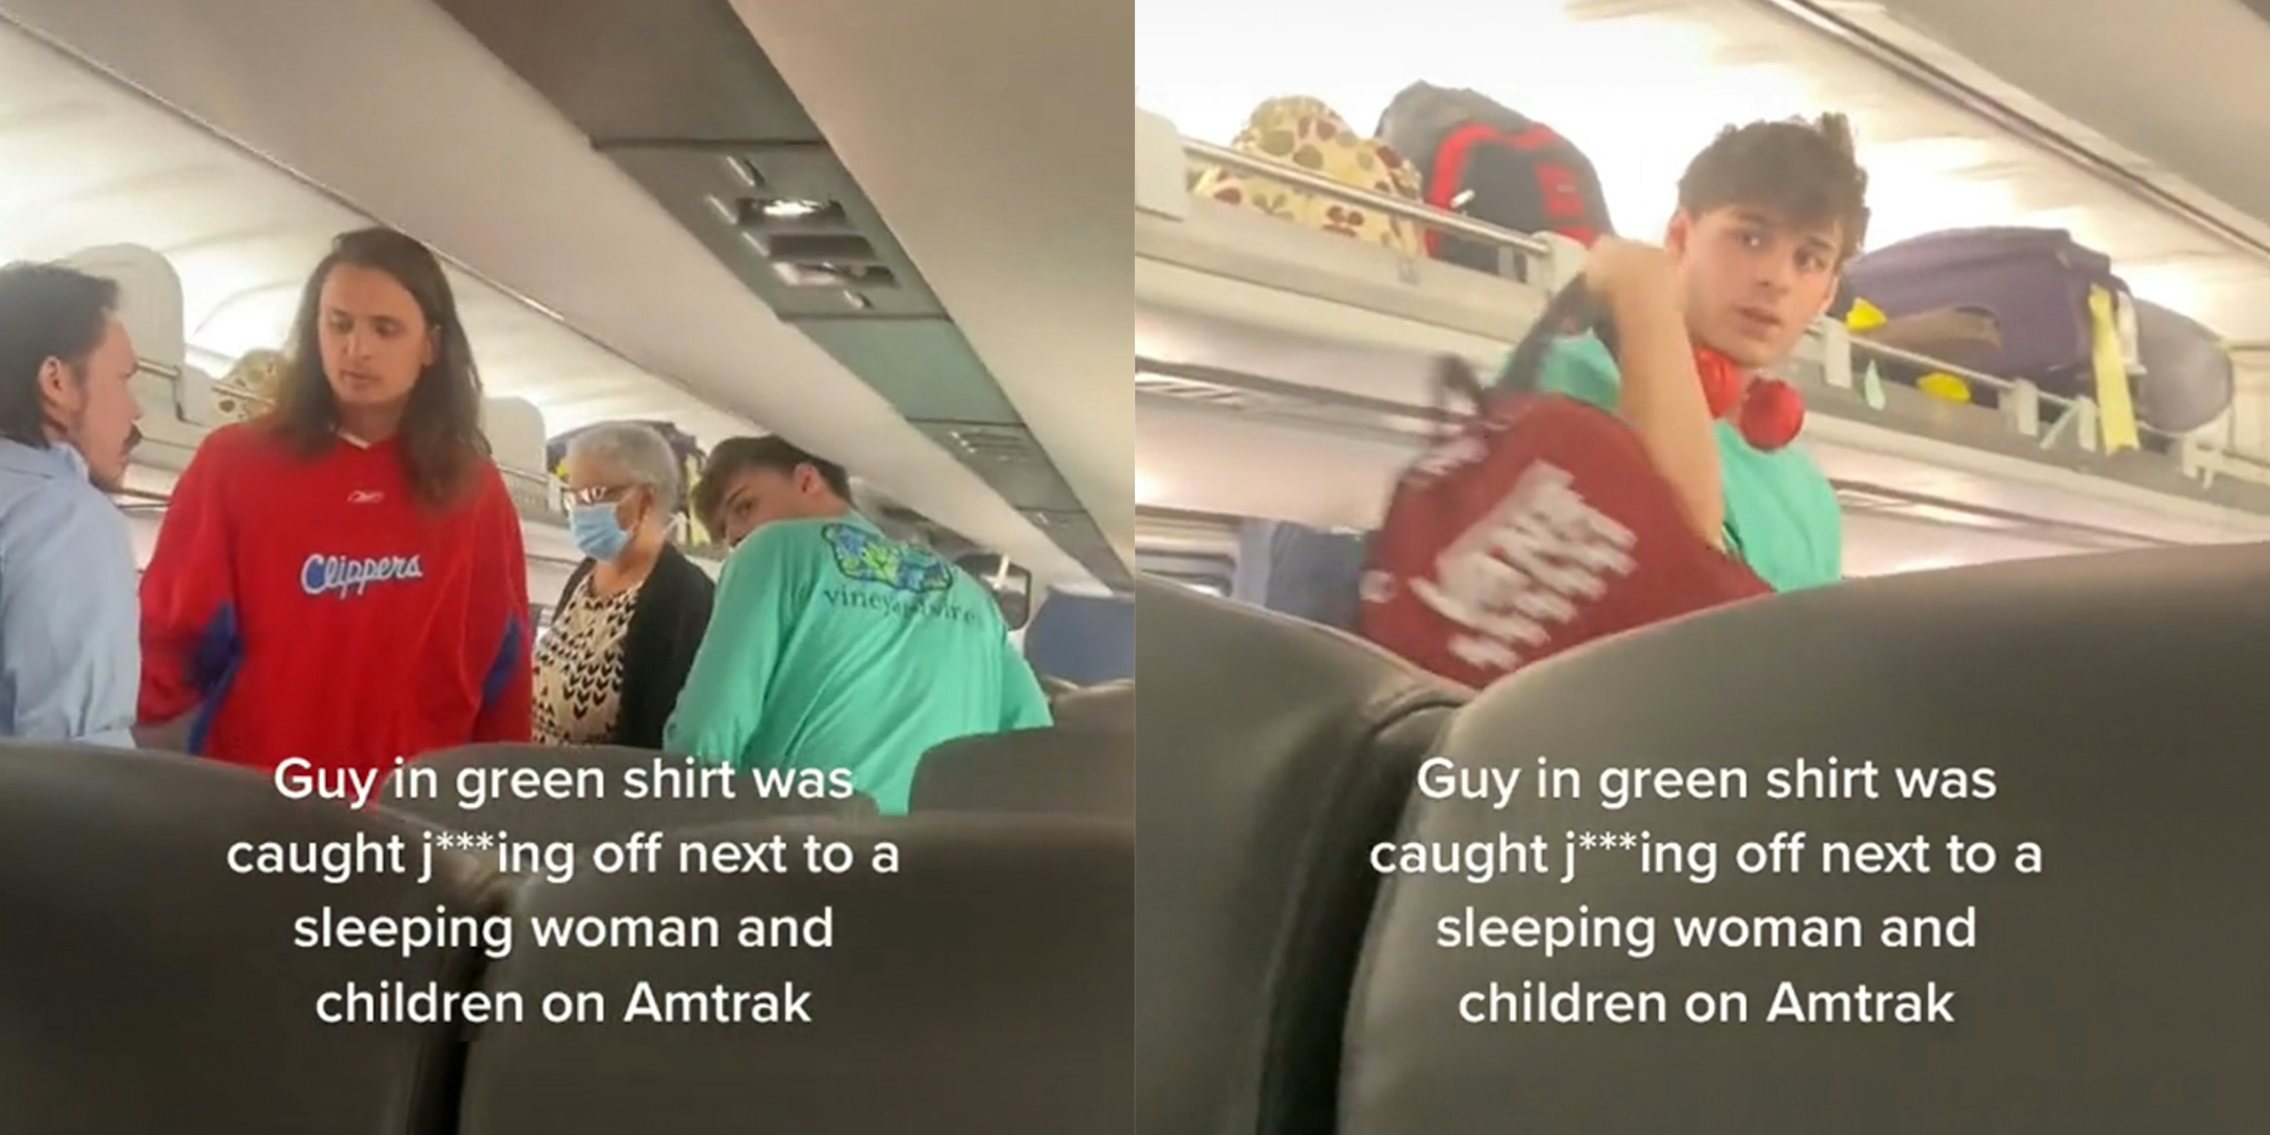 people on train with caption 'Guy in green shirt was caught j***ing off next to a sleeping woman and children on Amtrak'